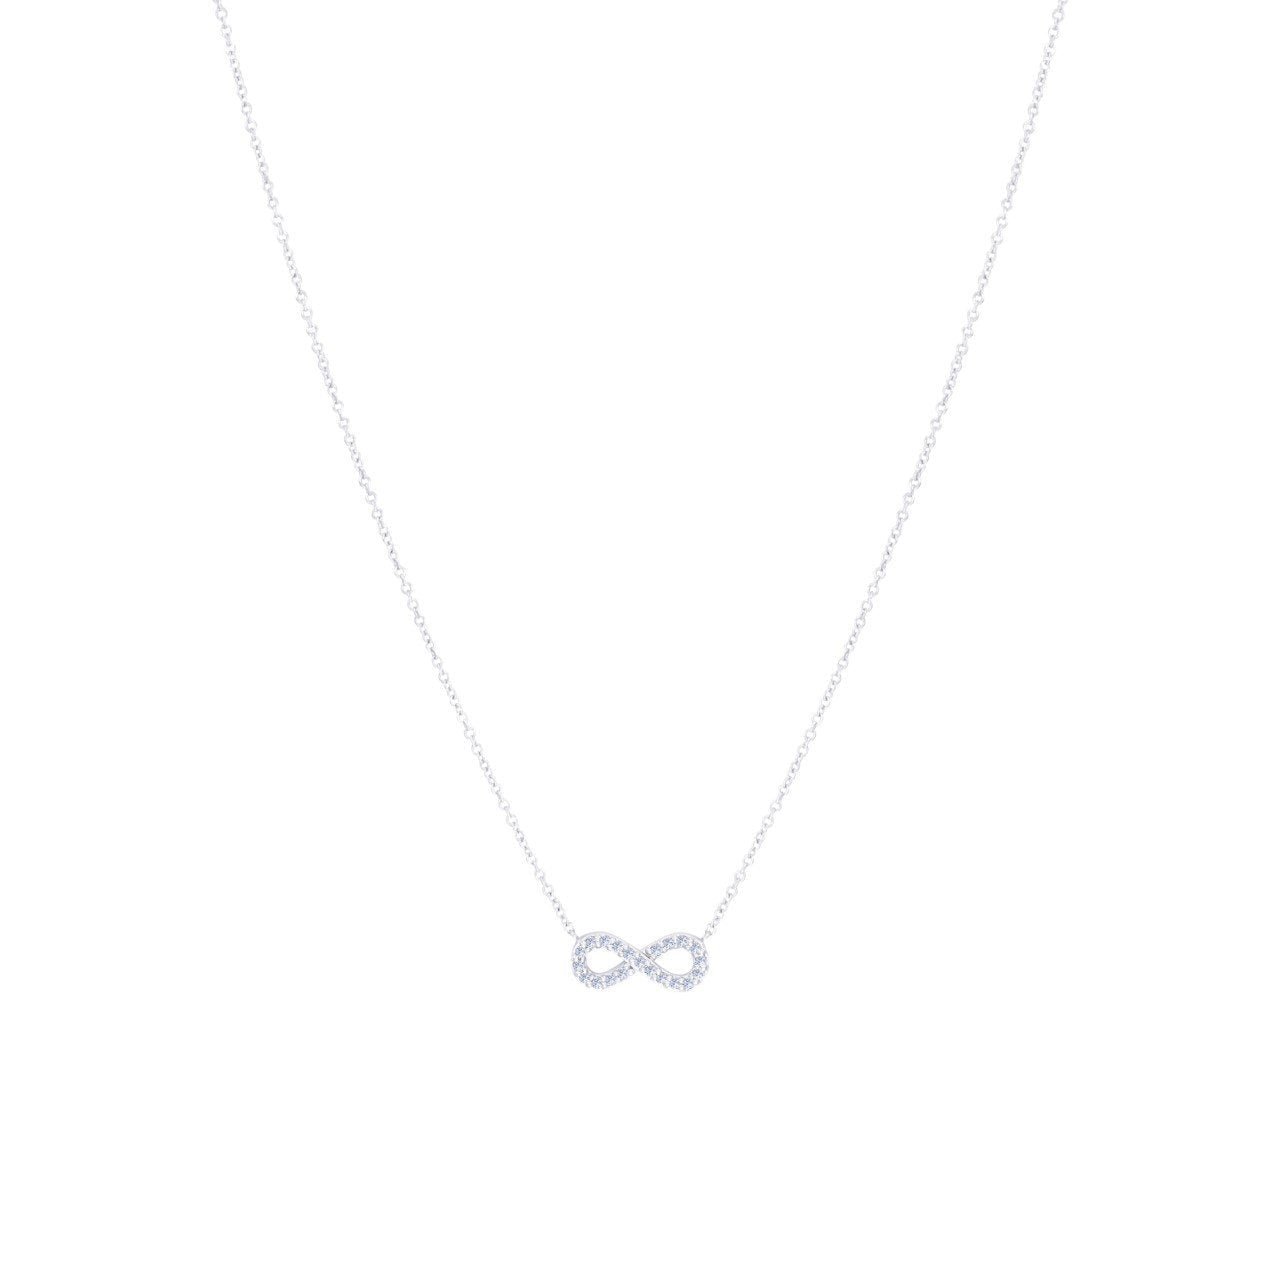 Gold Infinity Necklace With Diamonds - Alexis Jae